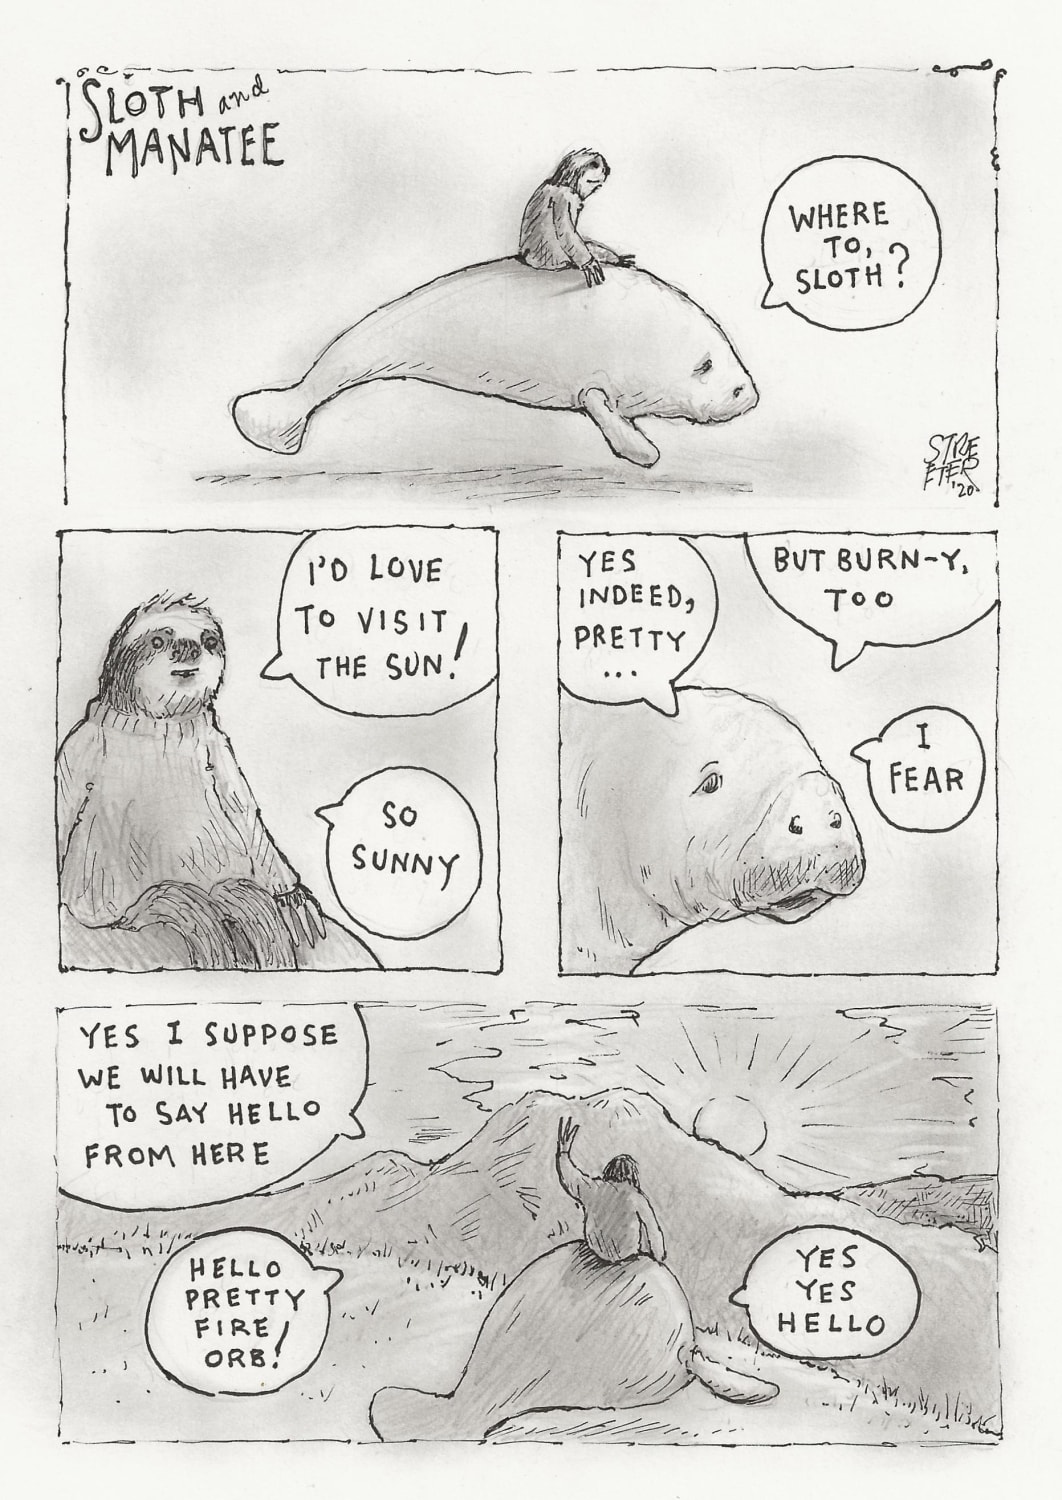 Sloth and Manatee: The very first comic